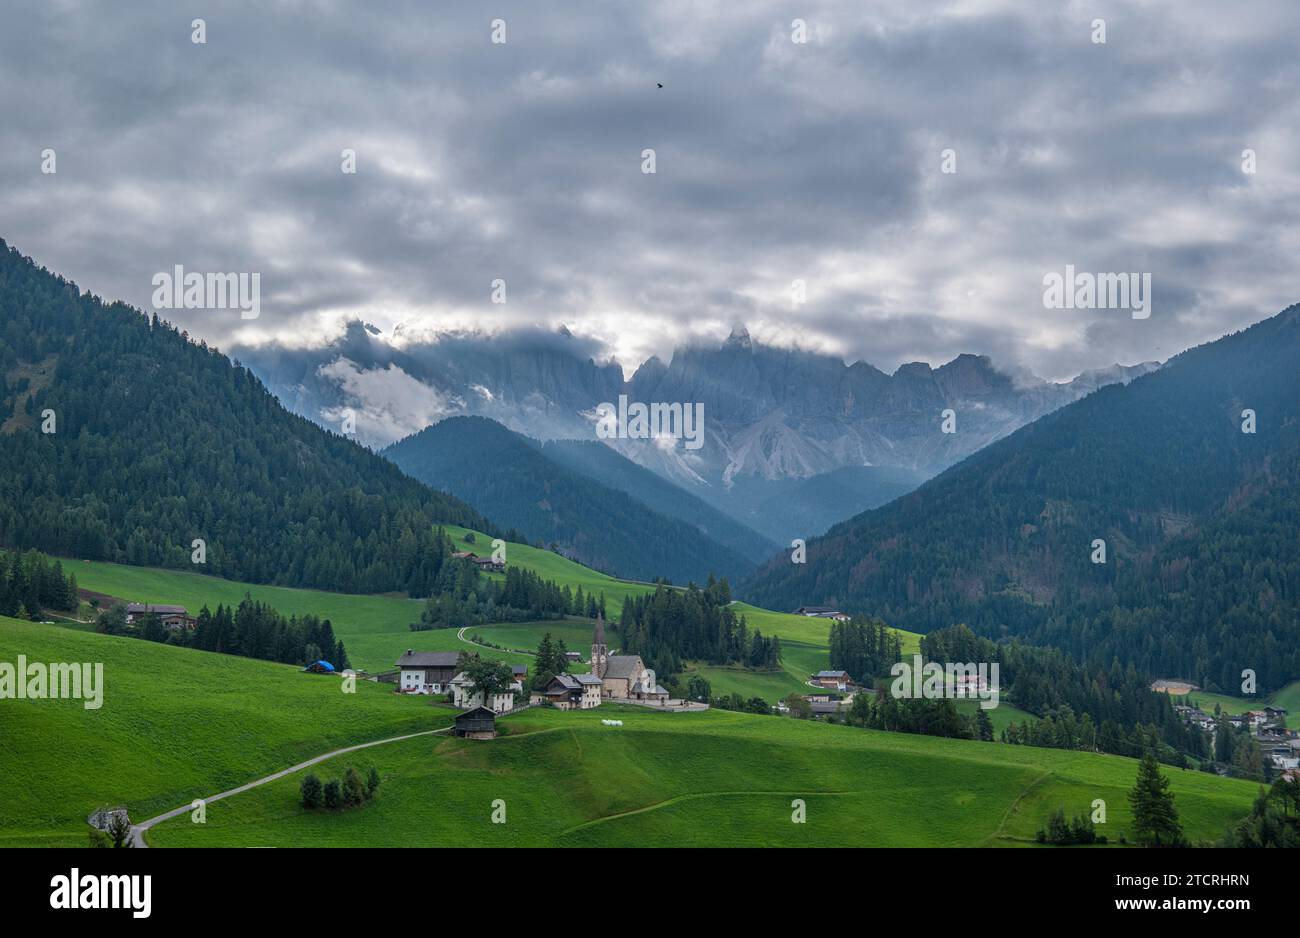 Santa Maddalena, Val di Funes,Alpine village, iconic church, meadows, forest trails, and Tyrolean charm create a picturesque scene with breathtaking s Stock Photo